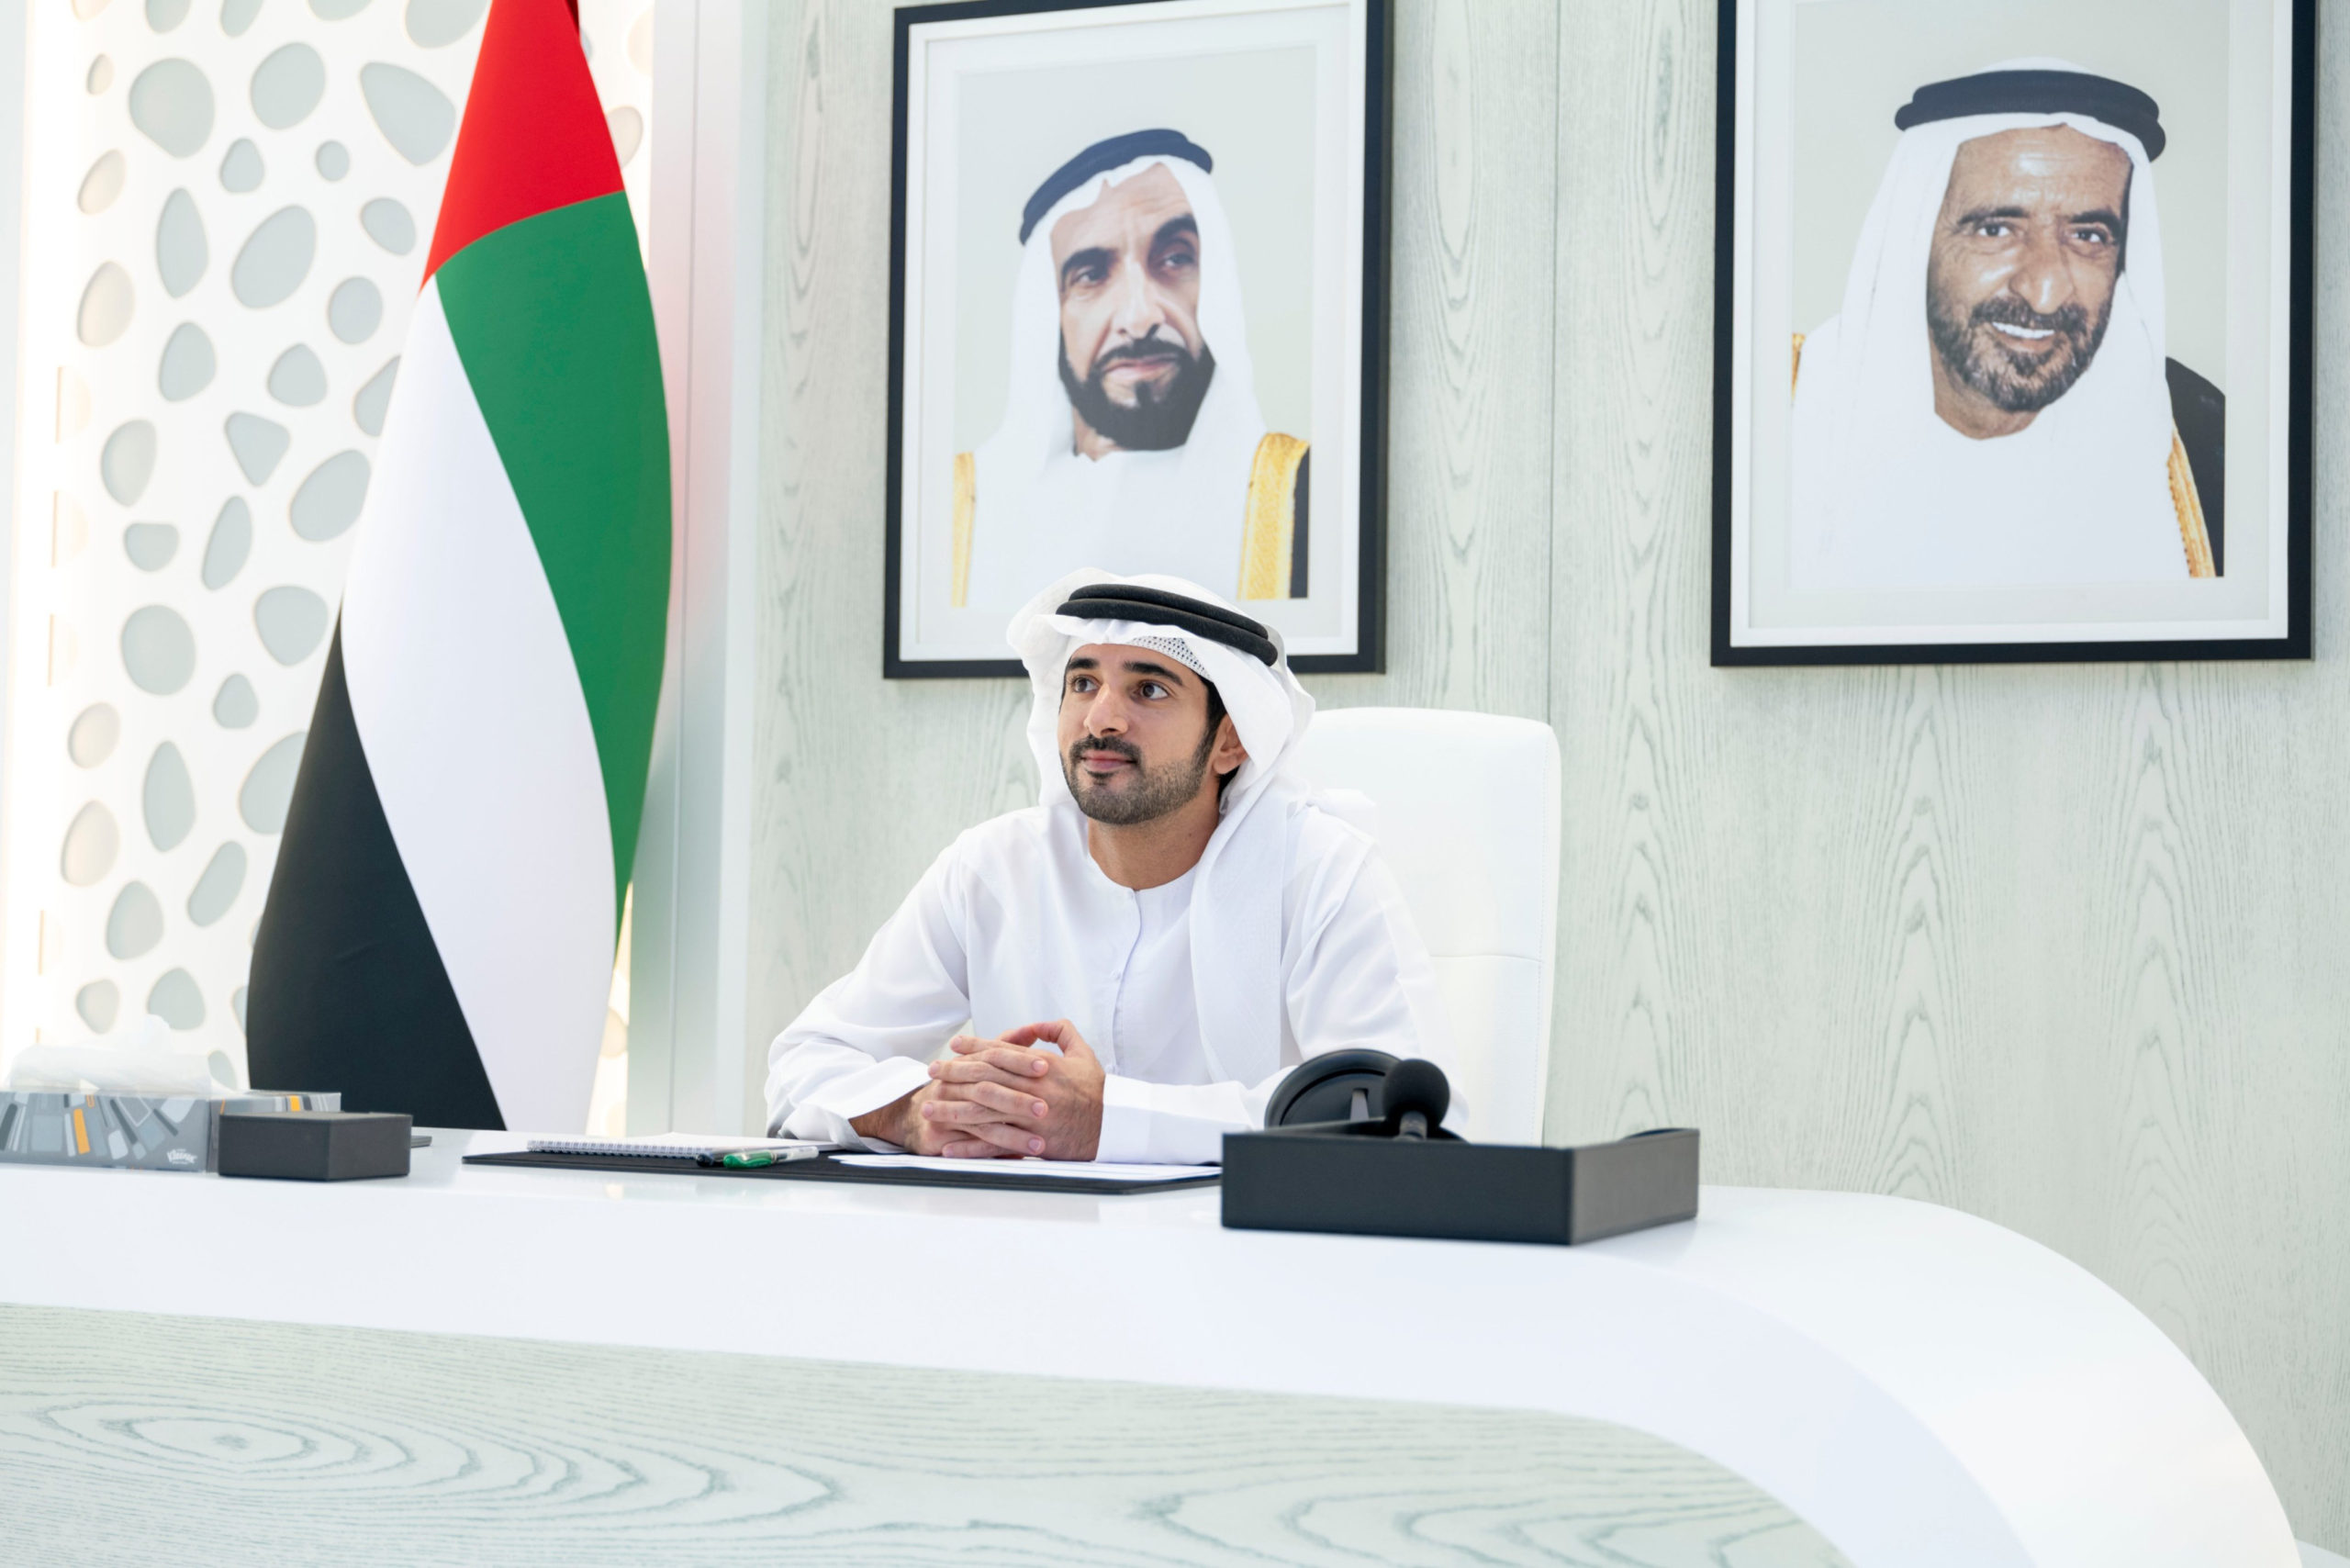 Higher Committee for Development and Citizens Affairs chaired by Hamdan bin Mohammed approves immediate allocation of 2000 residential land plots at Umm Nahad Fourth